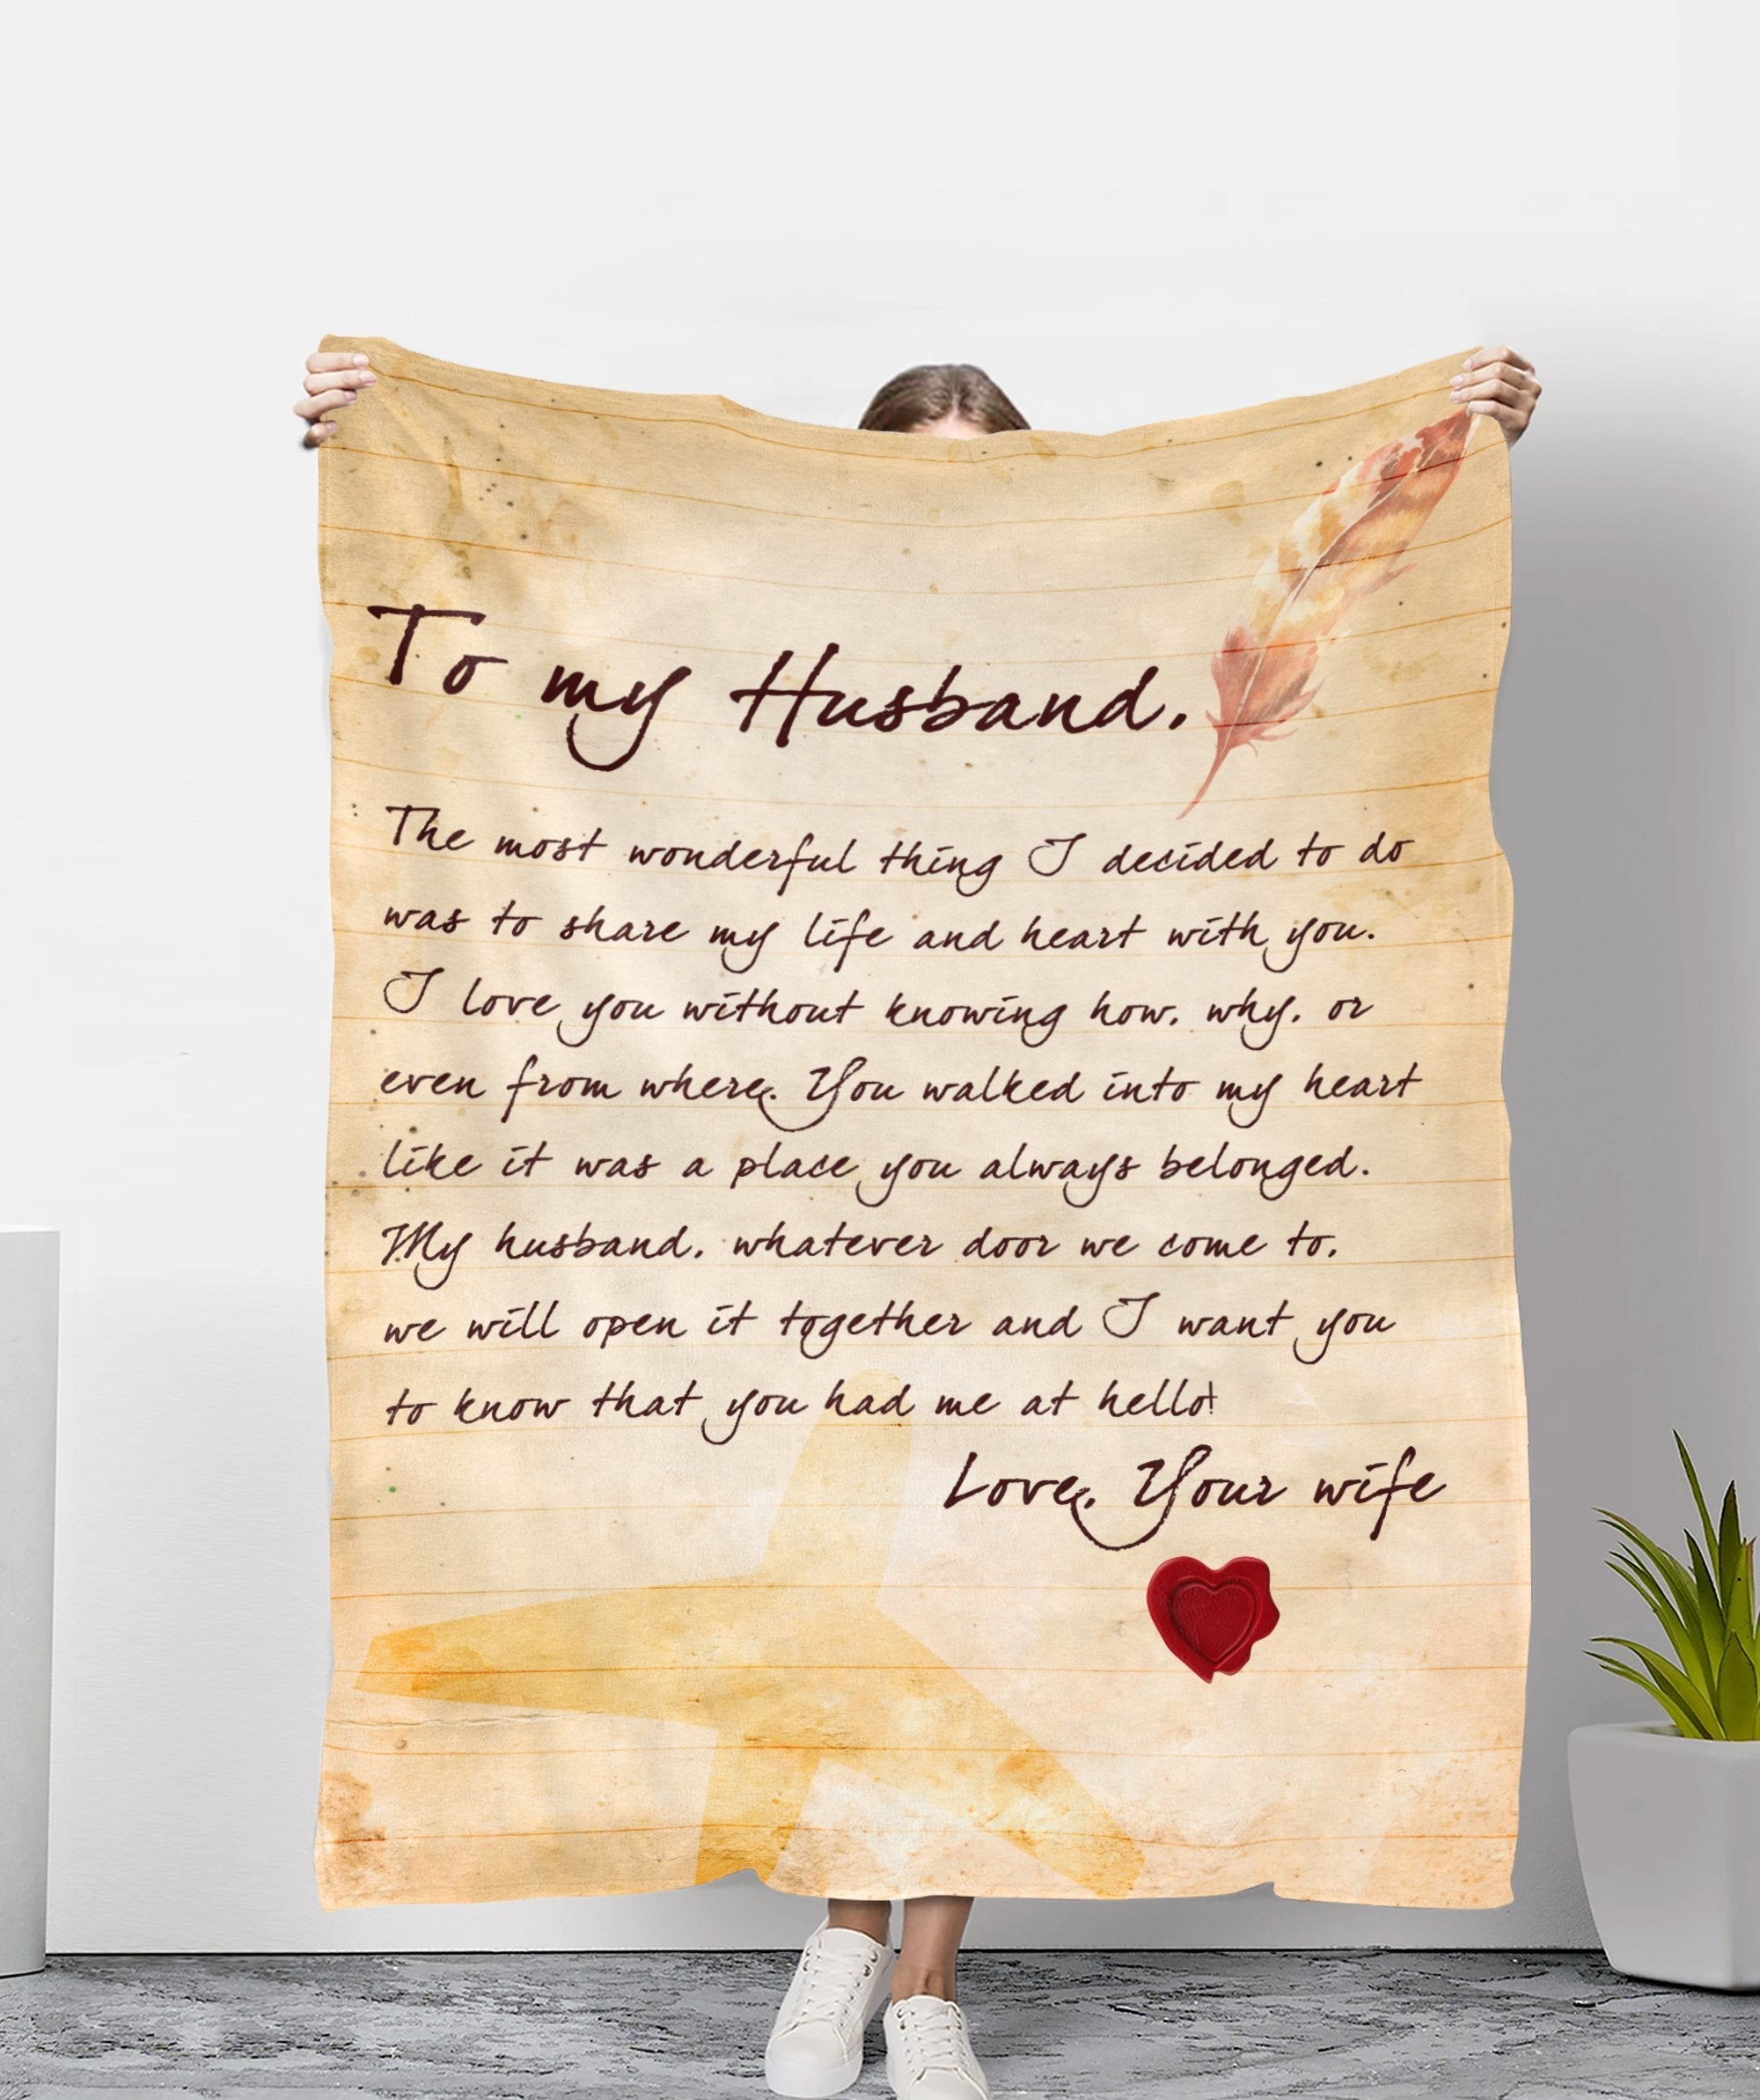 To My Husband You Had Me At Hello Letter Blanket Gift For Husband From Wife Father's Day Gift Birthday Gift Home Decor Bedding Couch Sofa Soft and Comfy Cozy